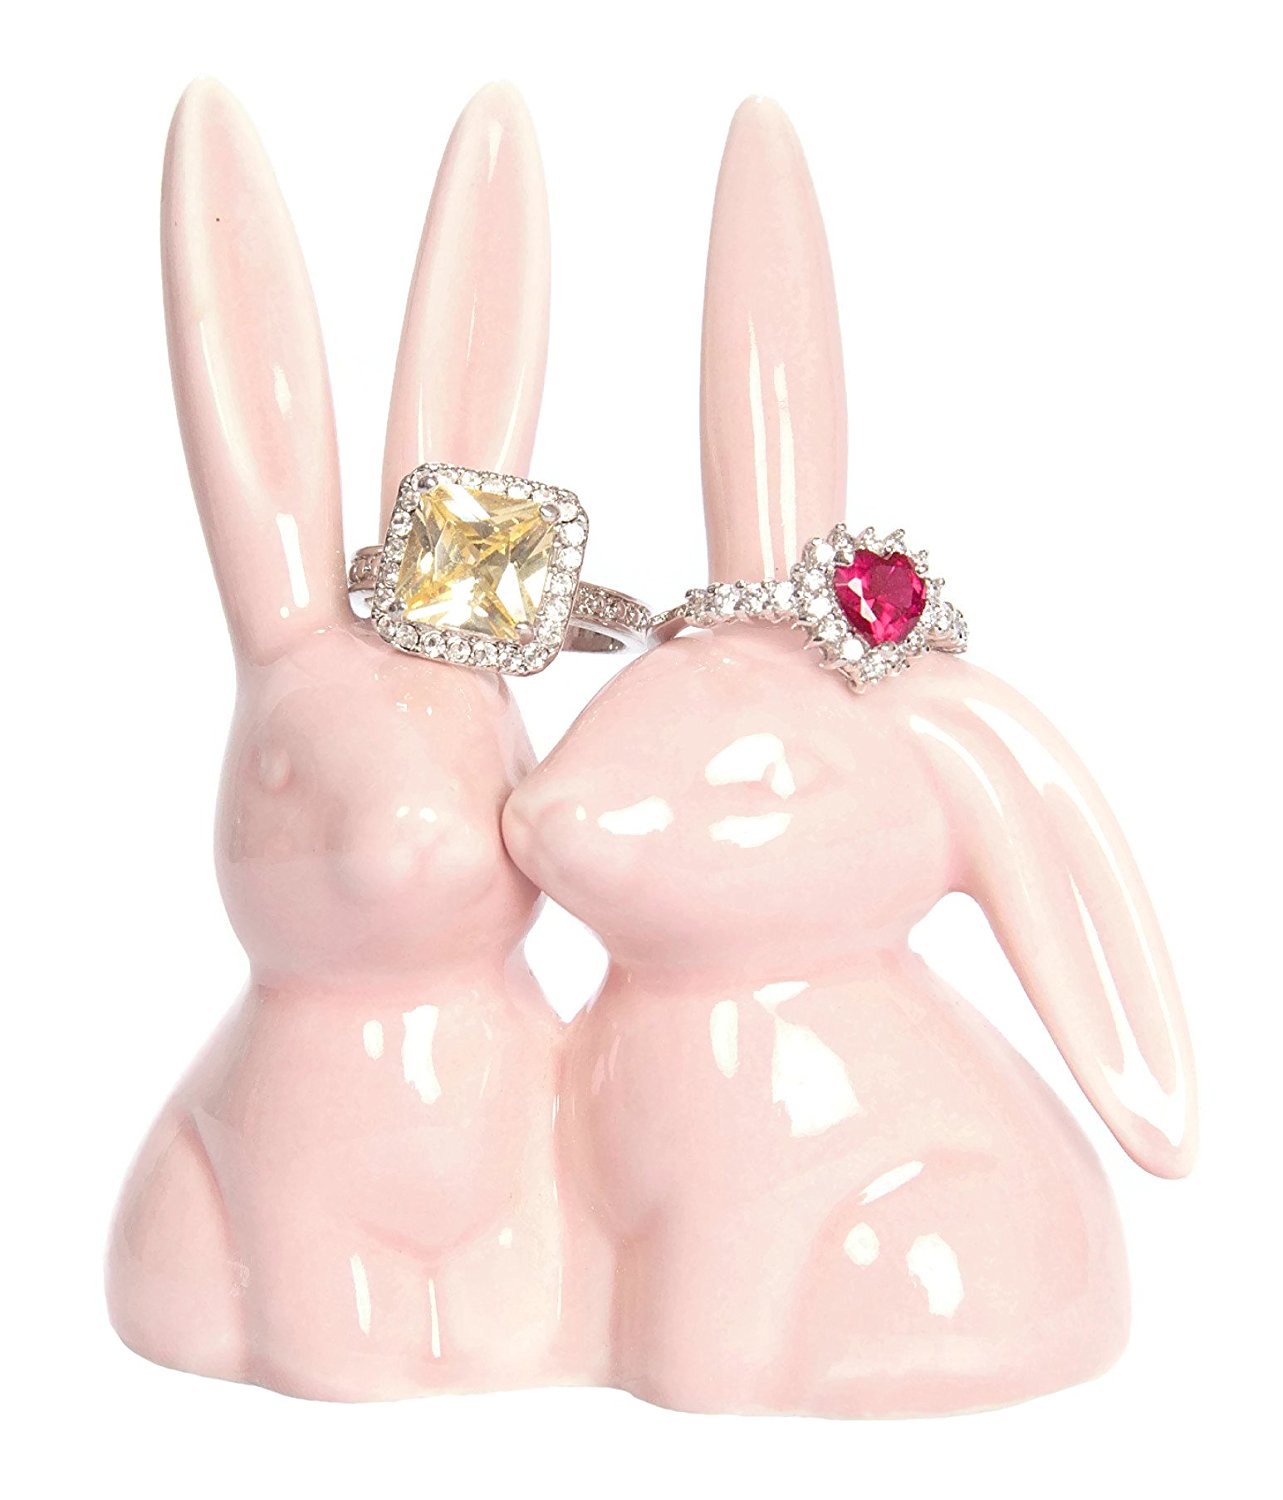 Feng Shui Decor In The Bedroom Should Alwasy Need To Be In Two's - Click Here For These Adorable Bunnies With Many Uses